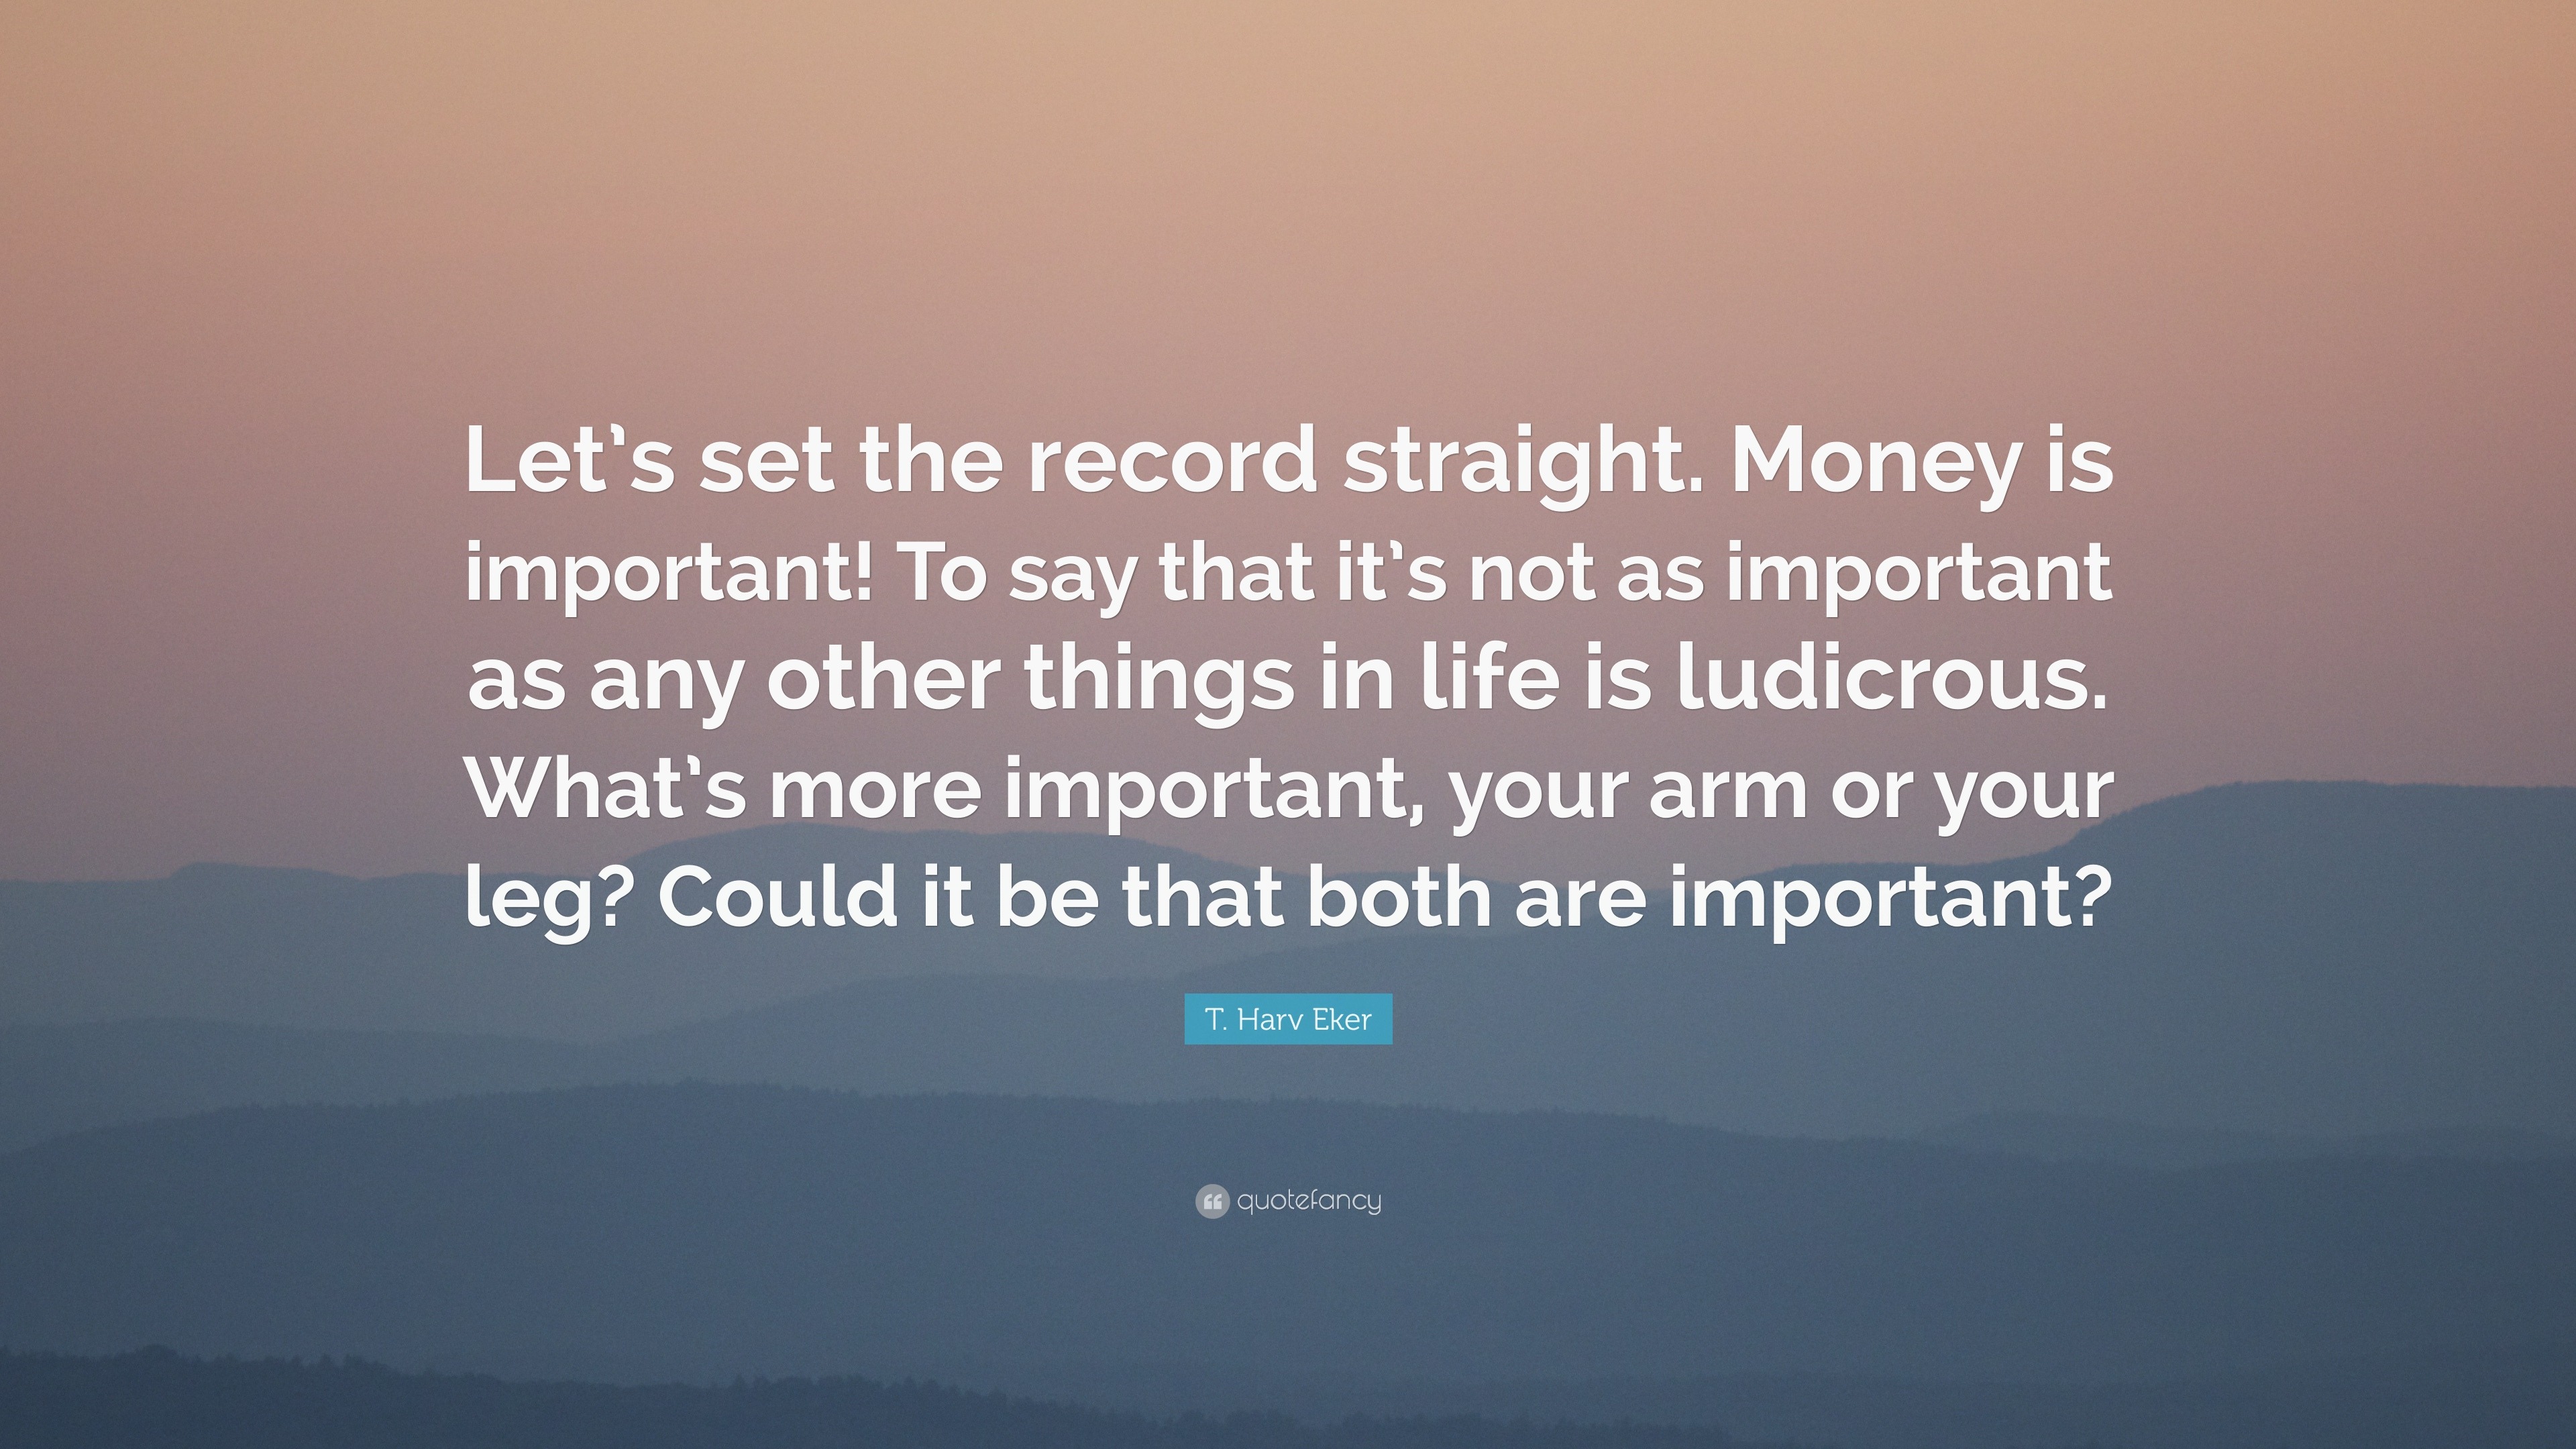 Royalty Free Money Is Very Important In Our Life Quotes Lifecoolquotes - t harv eker quote lets set the record straight money is